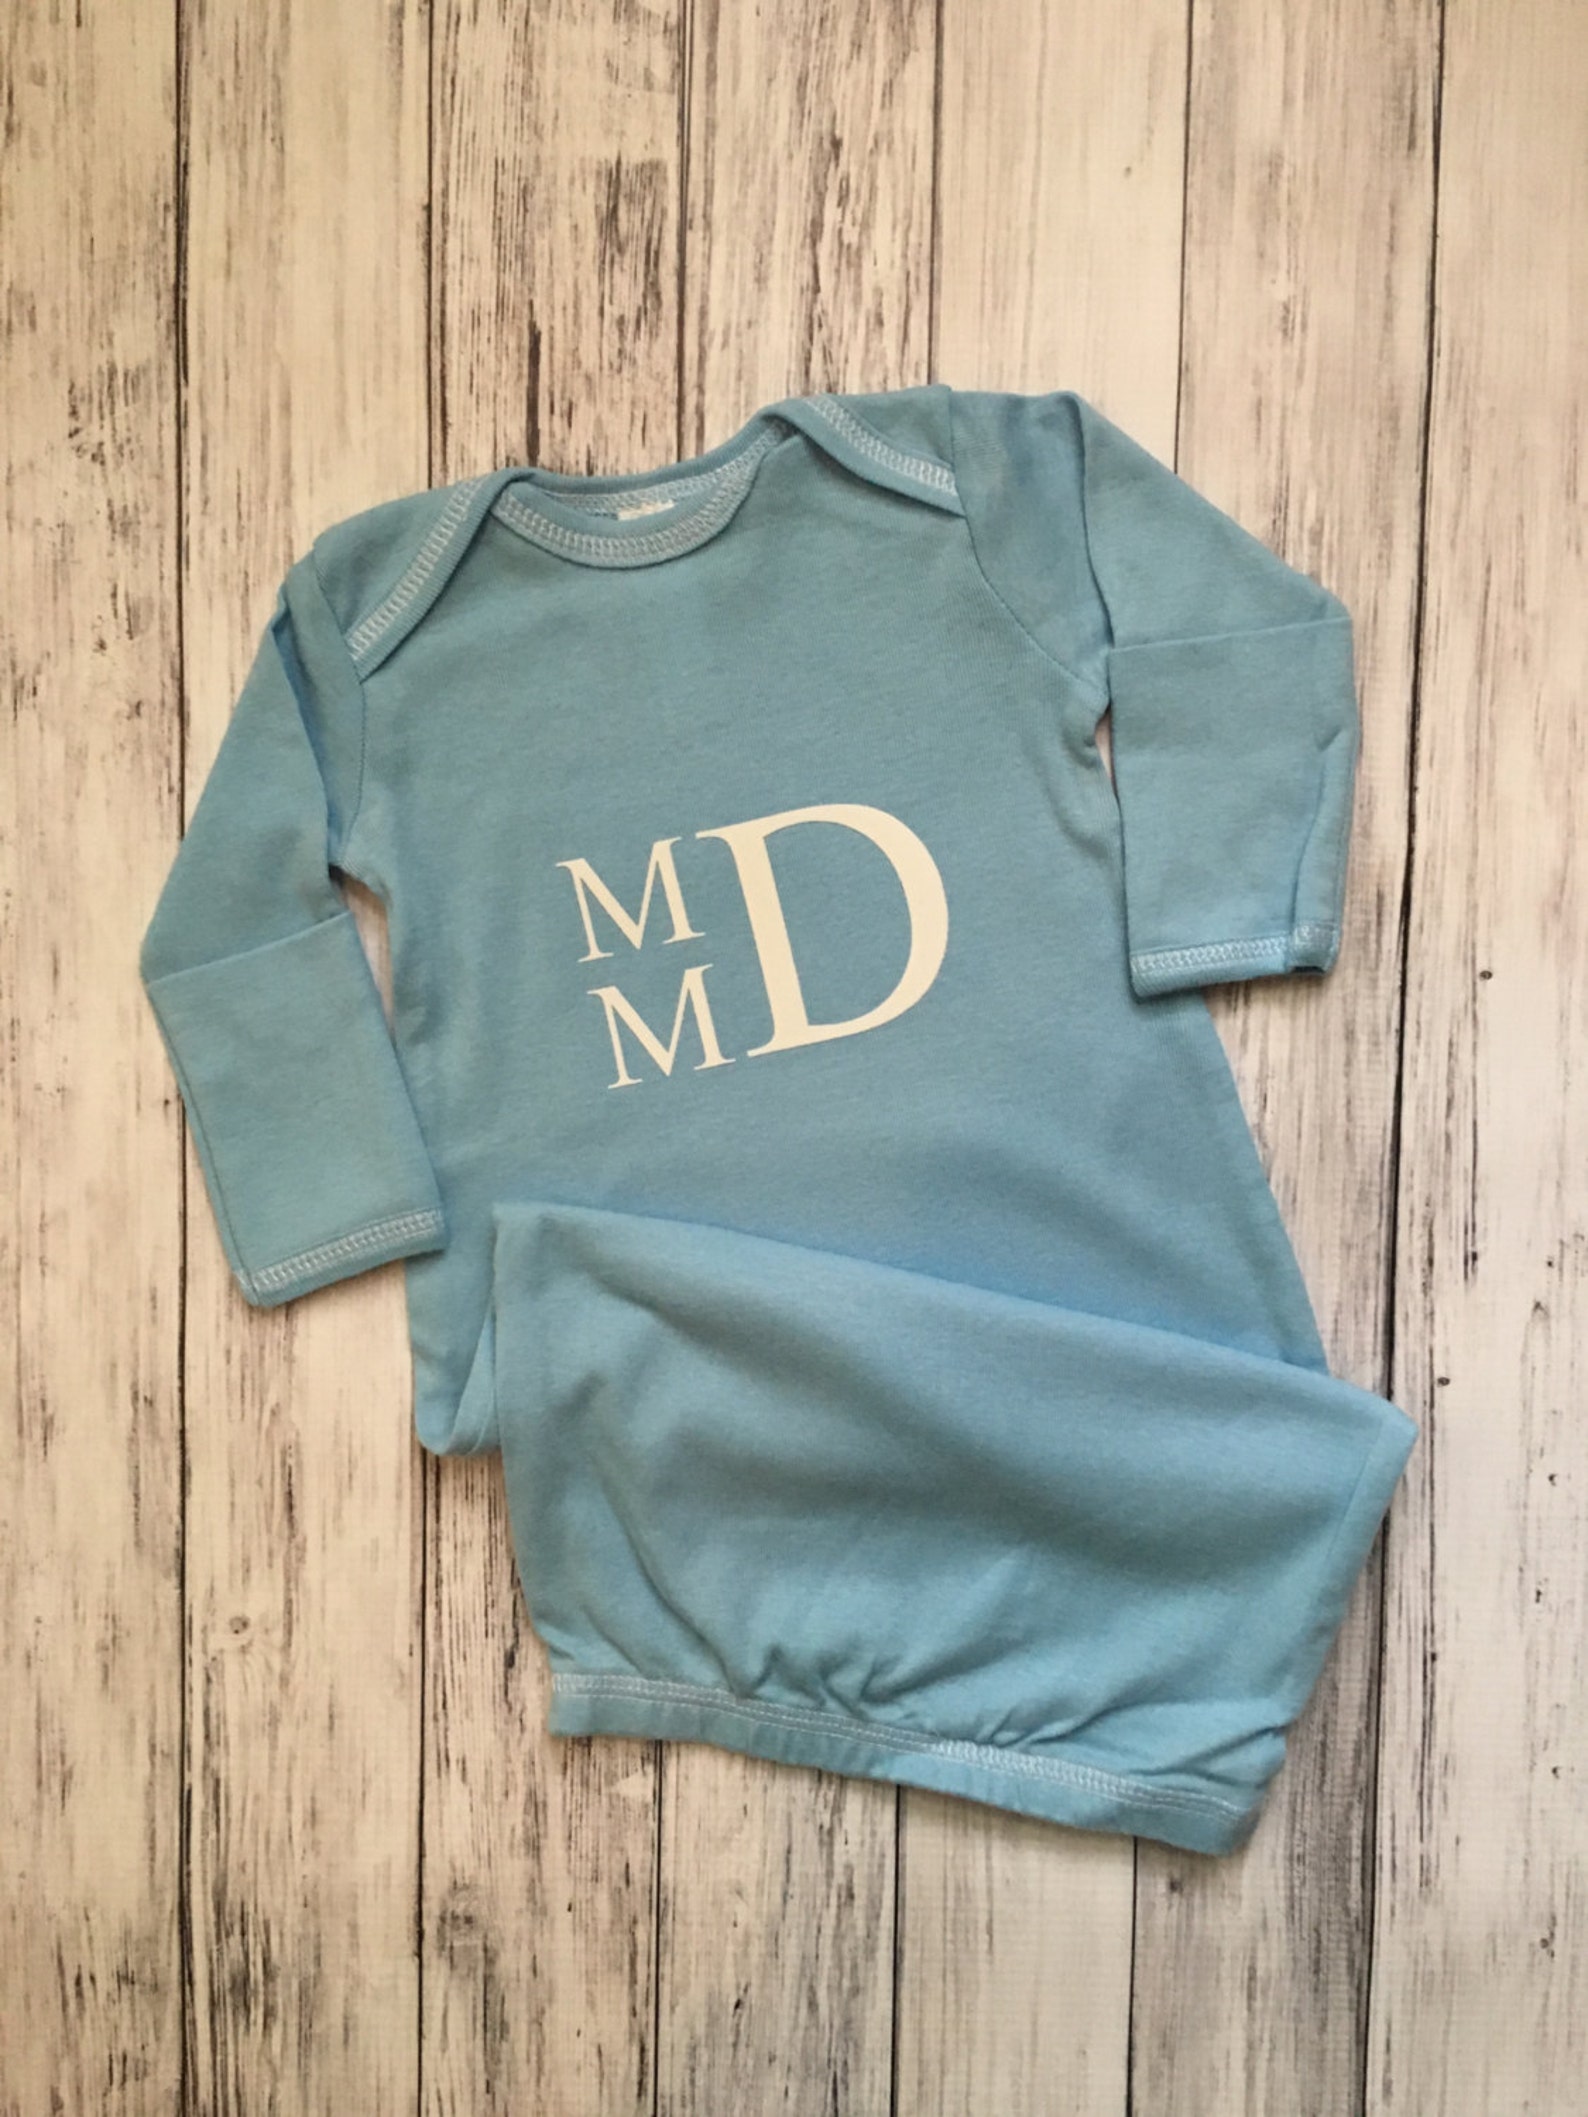 Baby Boy Coming Home Outfit // Personalized Newborn Outfit // - Etsy